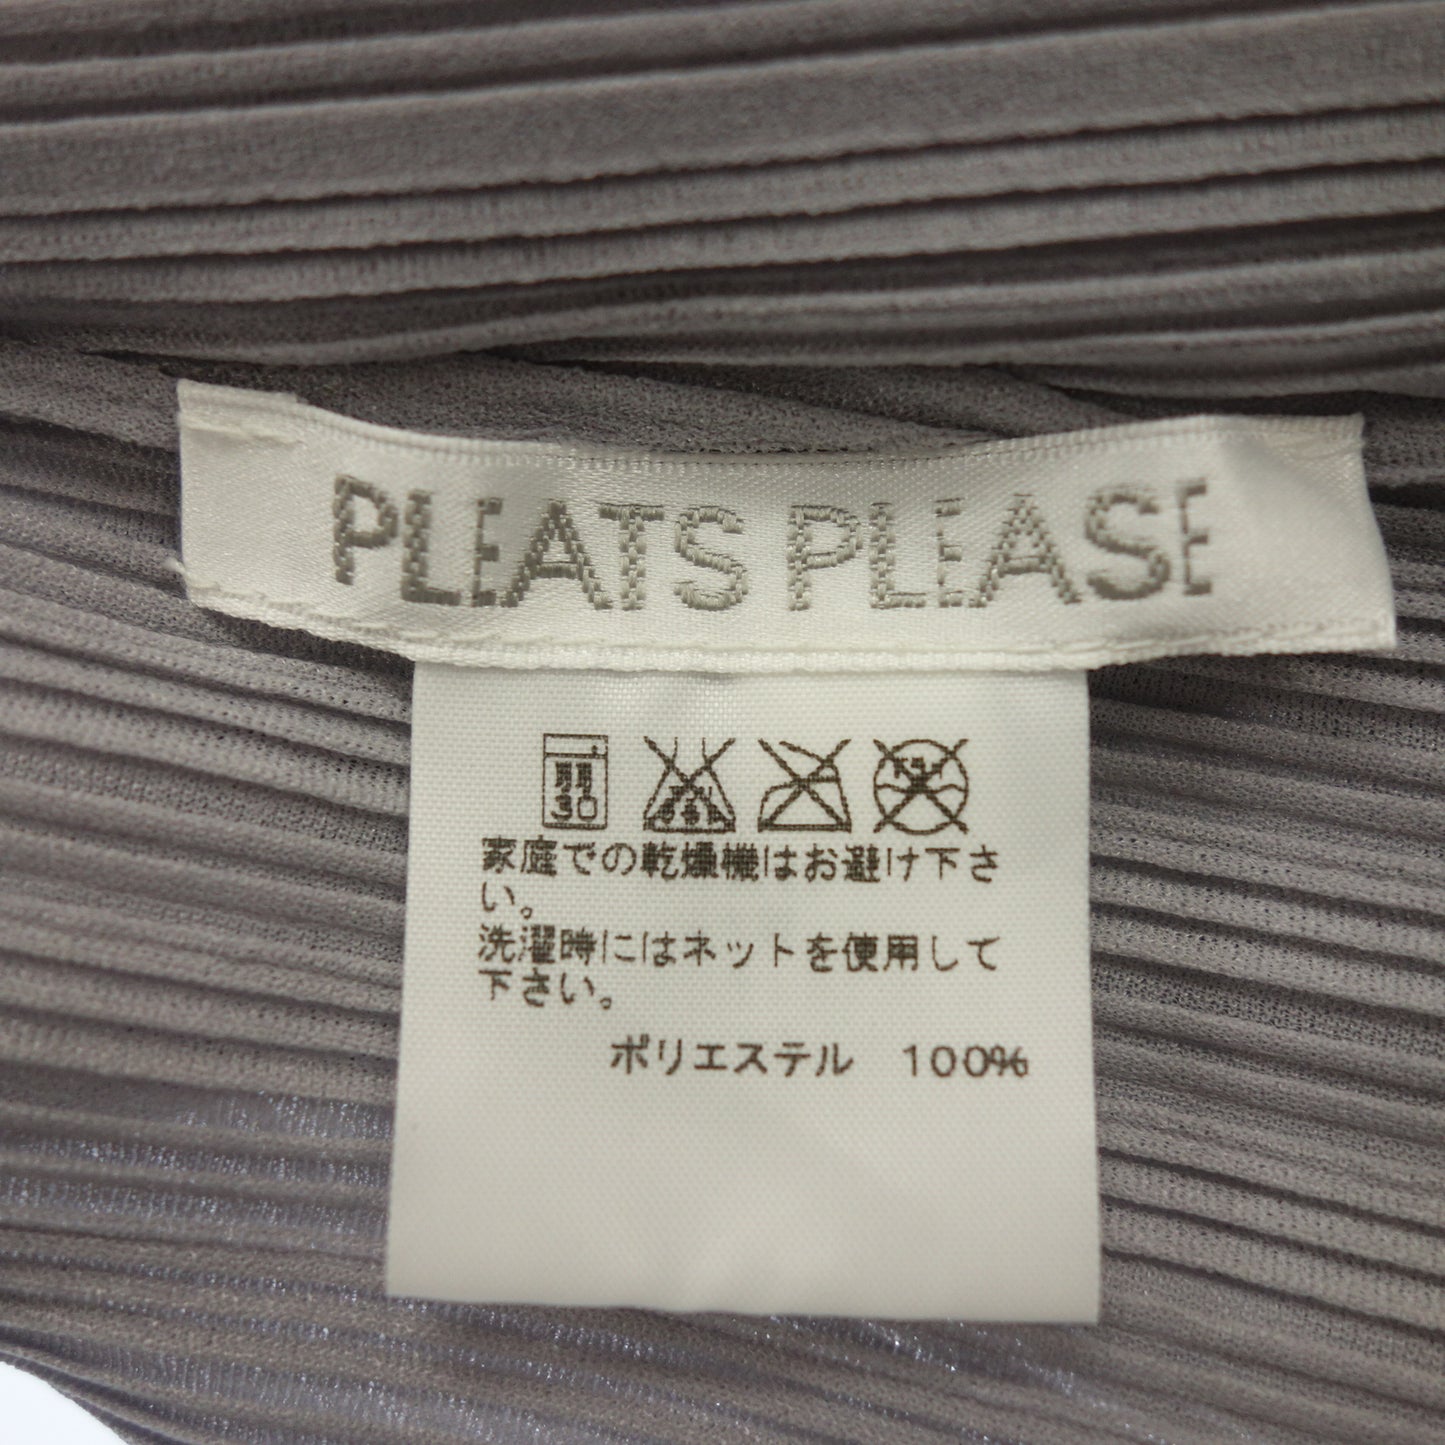 Very good condition ◆ Pleats Please long sleeve shirt Ladies size 03 Gray PLEATS PLEASE [AFB5] 